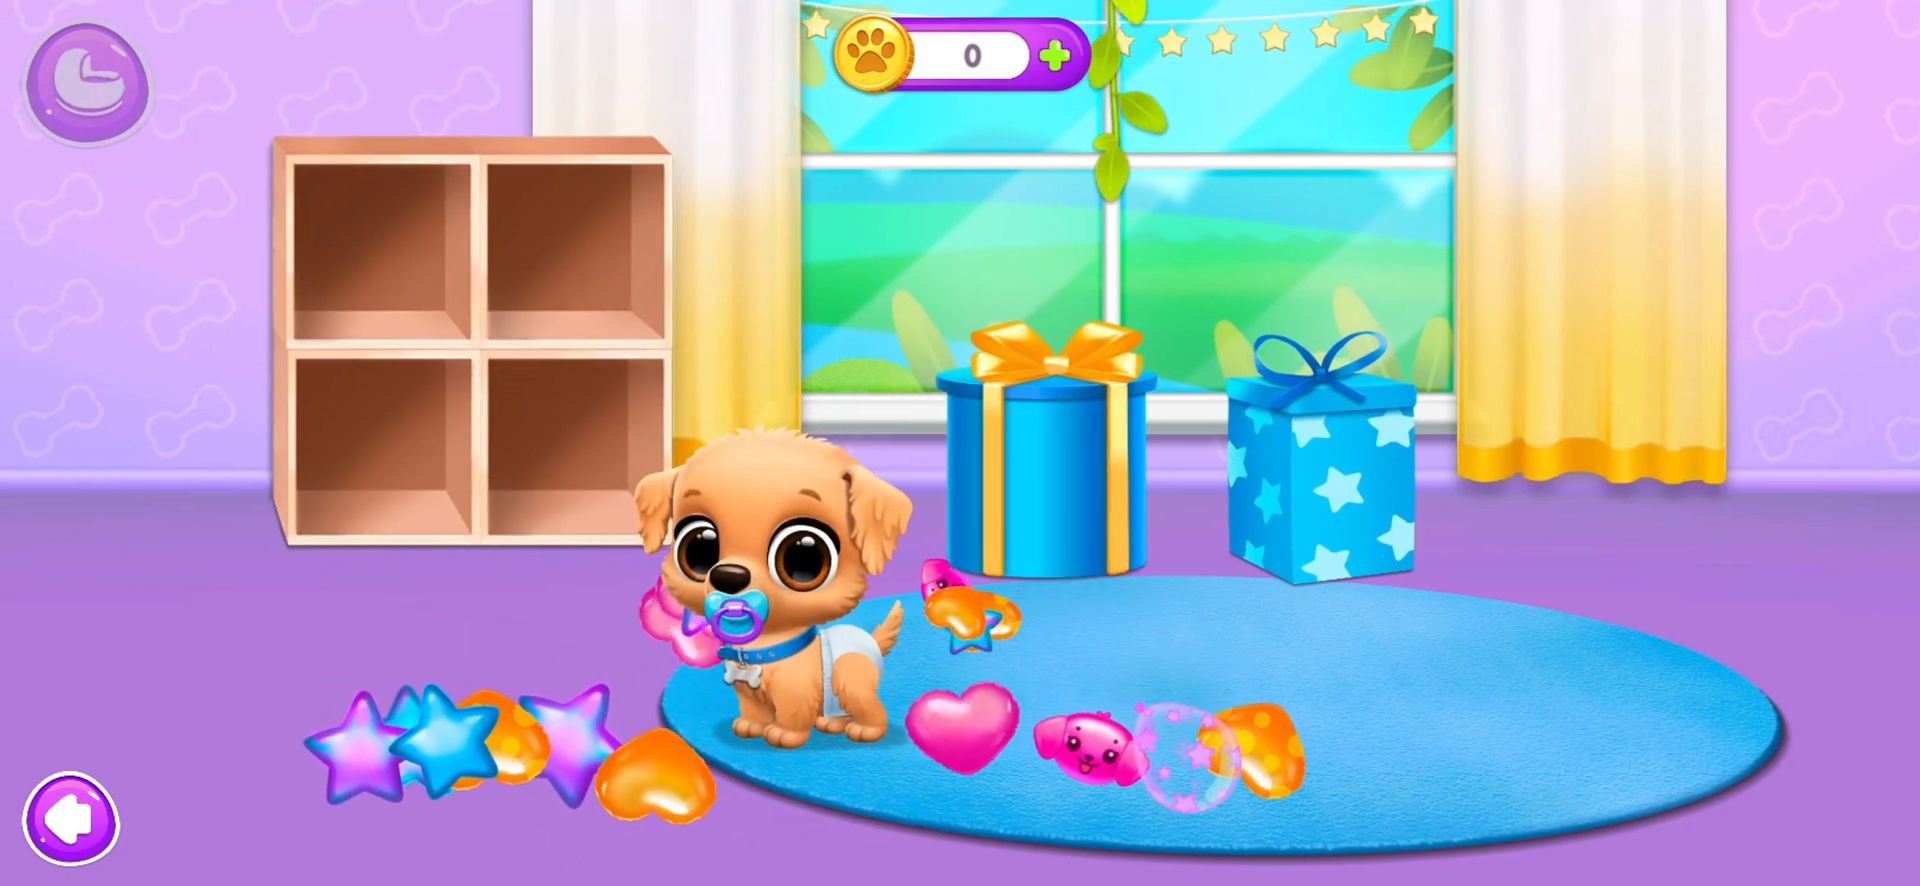 Gameplay of the FLOOF - My Pet House - Dog & Cat Games for Android phone or tablet.